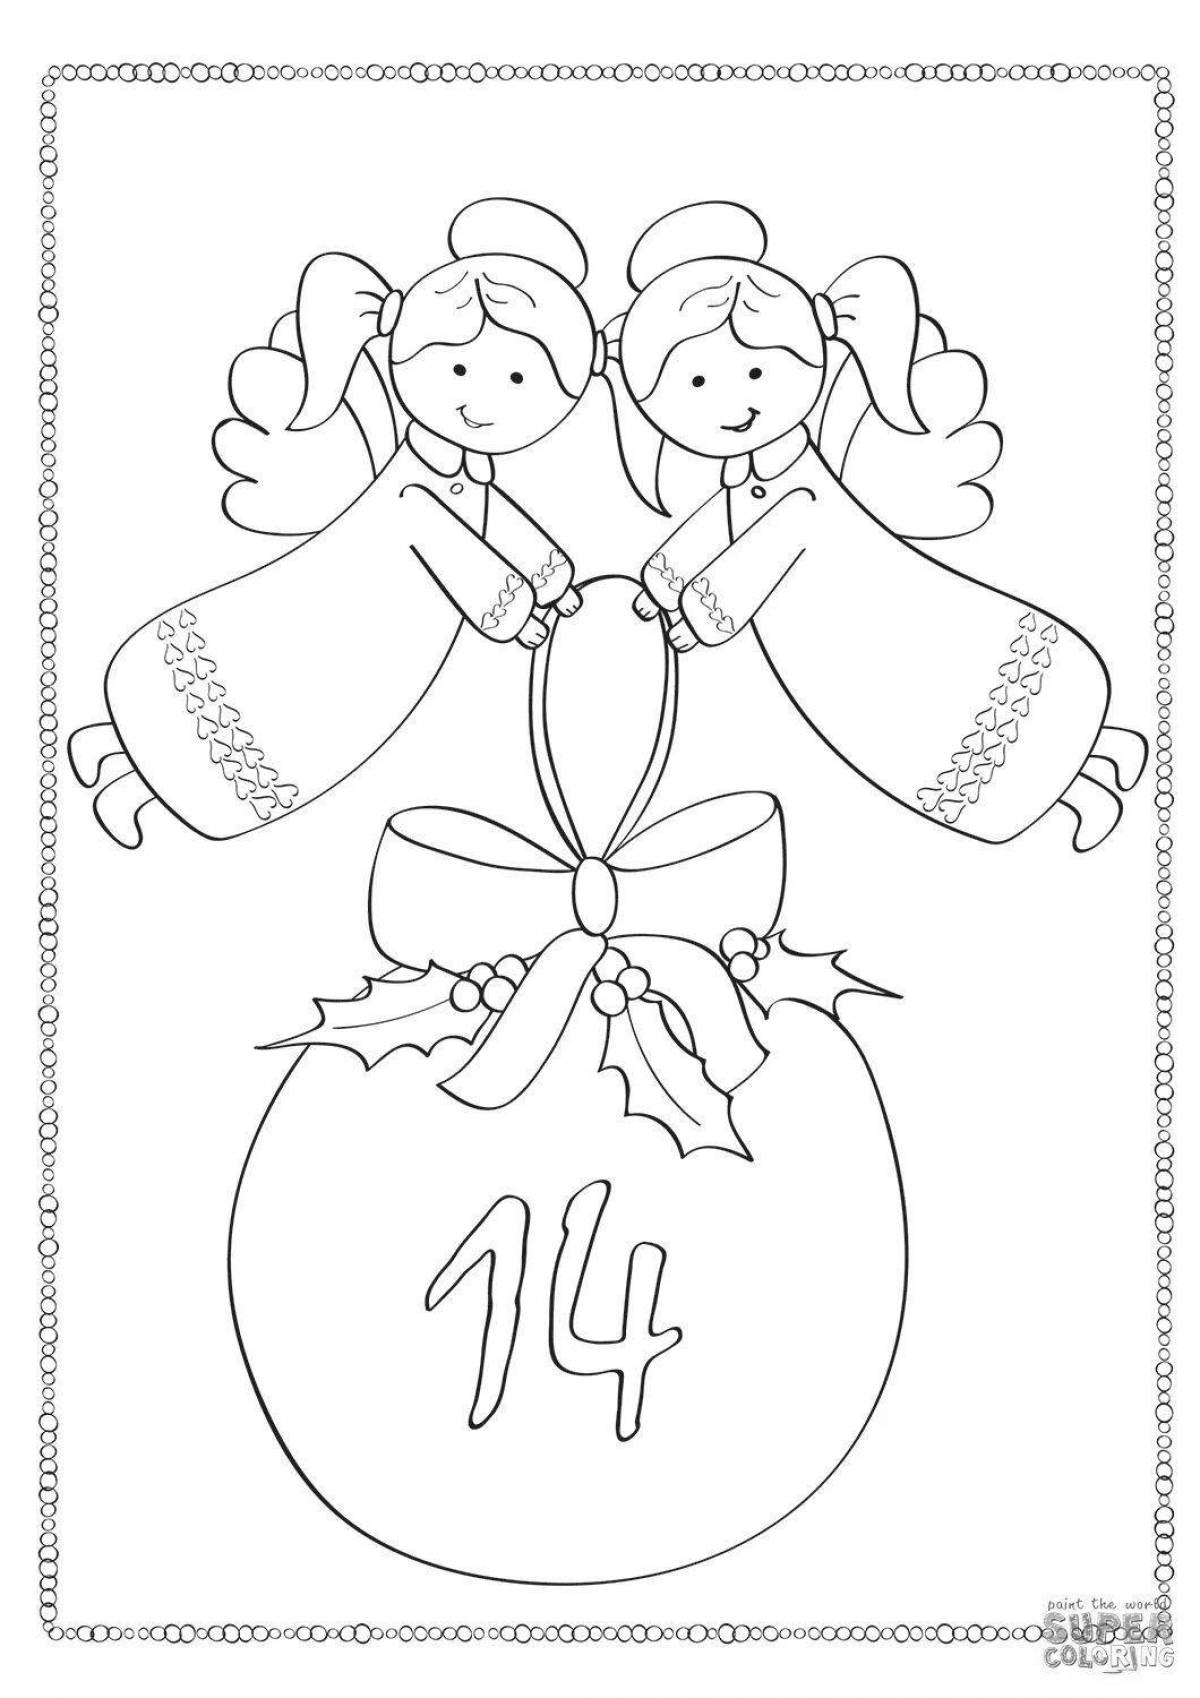 Glorious Christmas angels coloring page